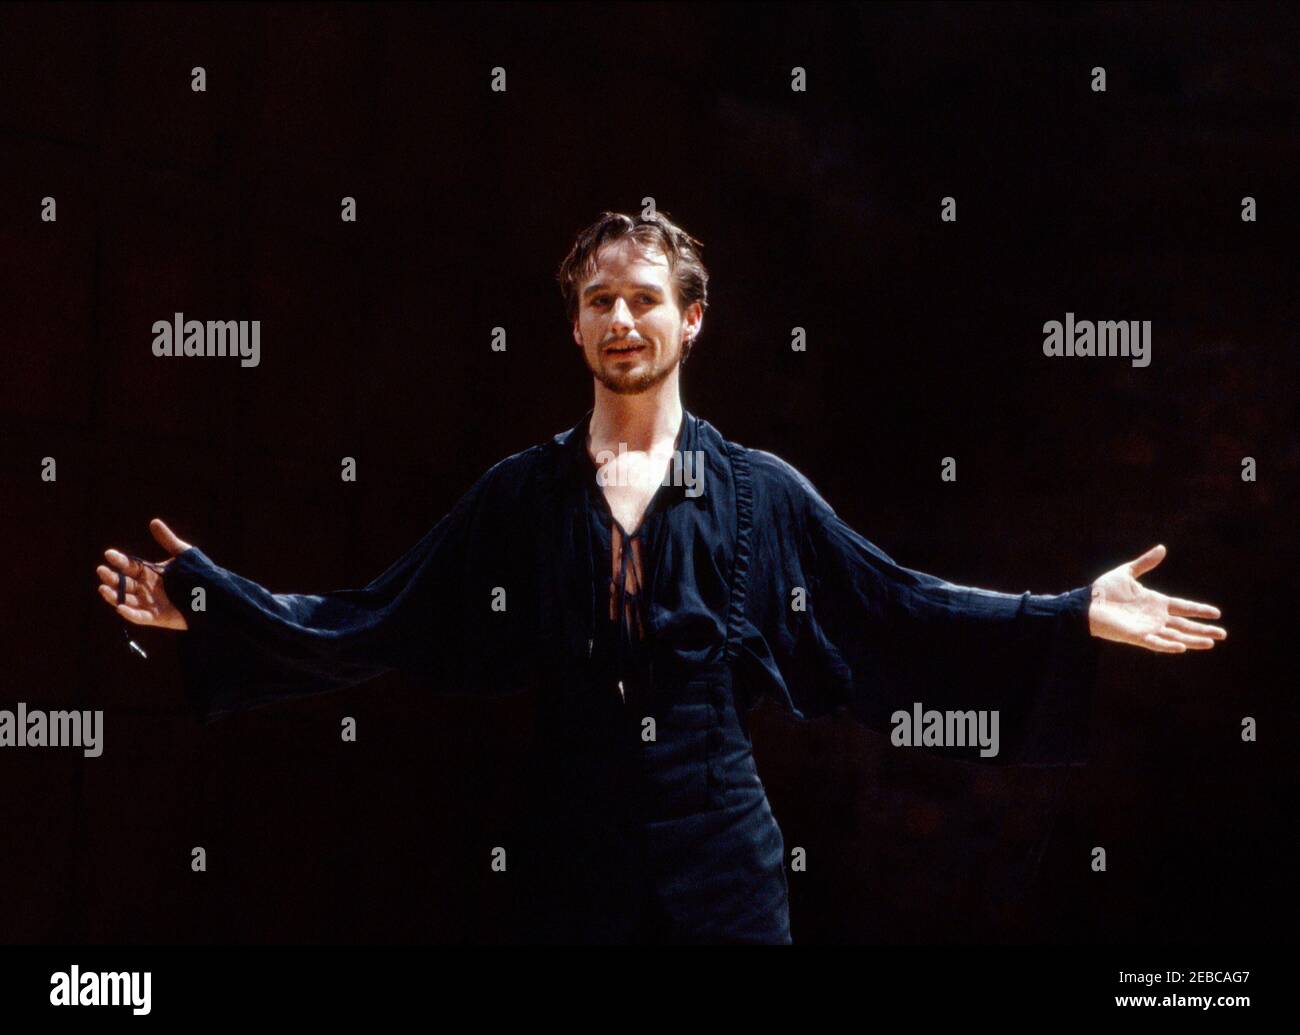 Linus Roache (Don Juan Tenorio) in THE LAST DAYS OF DON JUAN by Nick Dear at the Royal Shakespeare Company (RSC), Swan Theatre, Stratford-upon-Avon  05/04/1990  after Tirso de Molina  translator: Kate Littlewood  design: Kandis Cooke  lighting: Geraint Pughe  fights: Malcolm Ranson  director: Danny Boyle Stock Photo